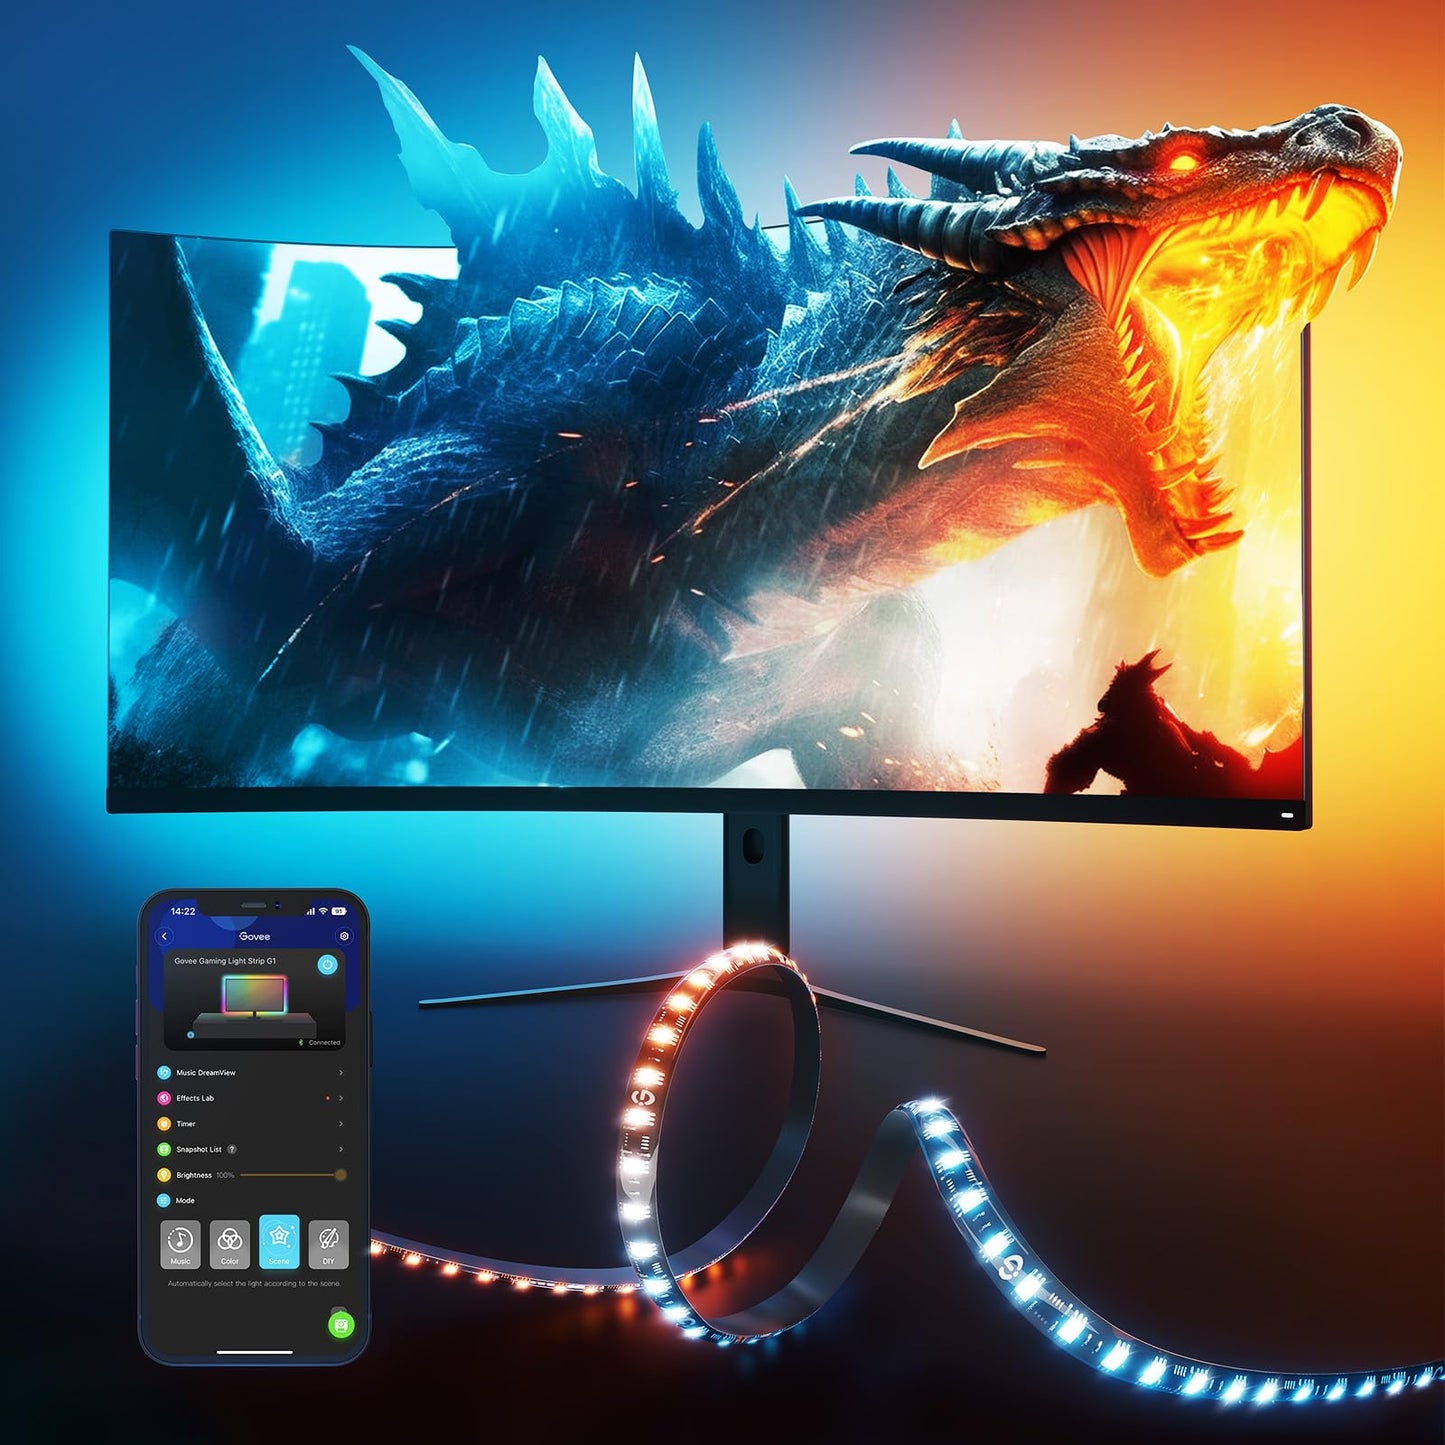 Govee Gaming Light Strip G1 Monitor Backlight for 27-34 Inch PC, Smart RGBIC WiFi LED Lights for Monitors with Color Matching, Adapts to Curved Monitors, Double Strip Light Beads with 123 Scene Modes